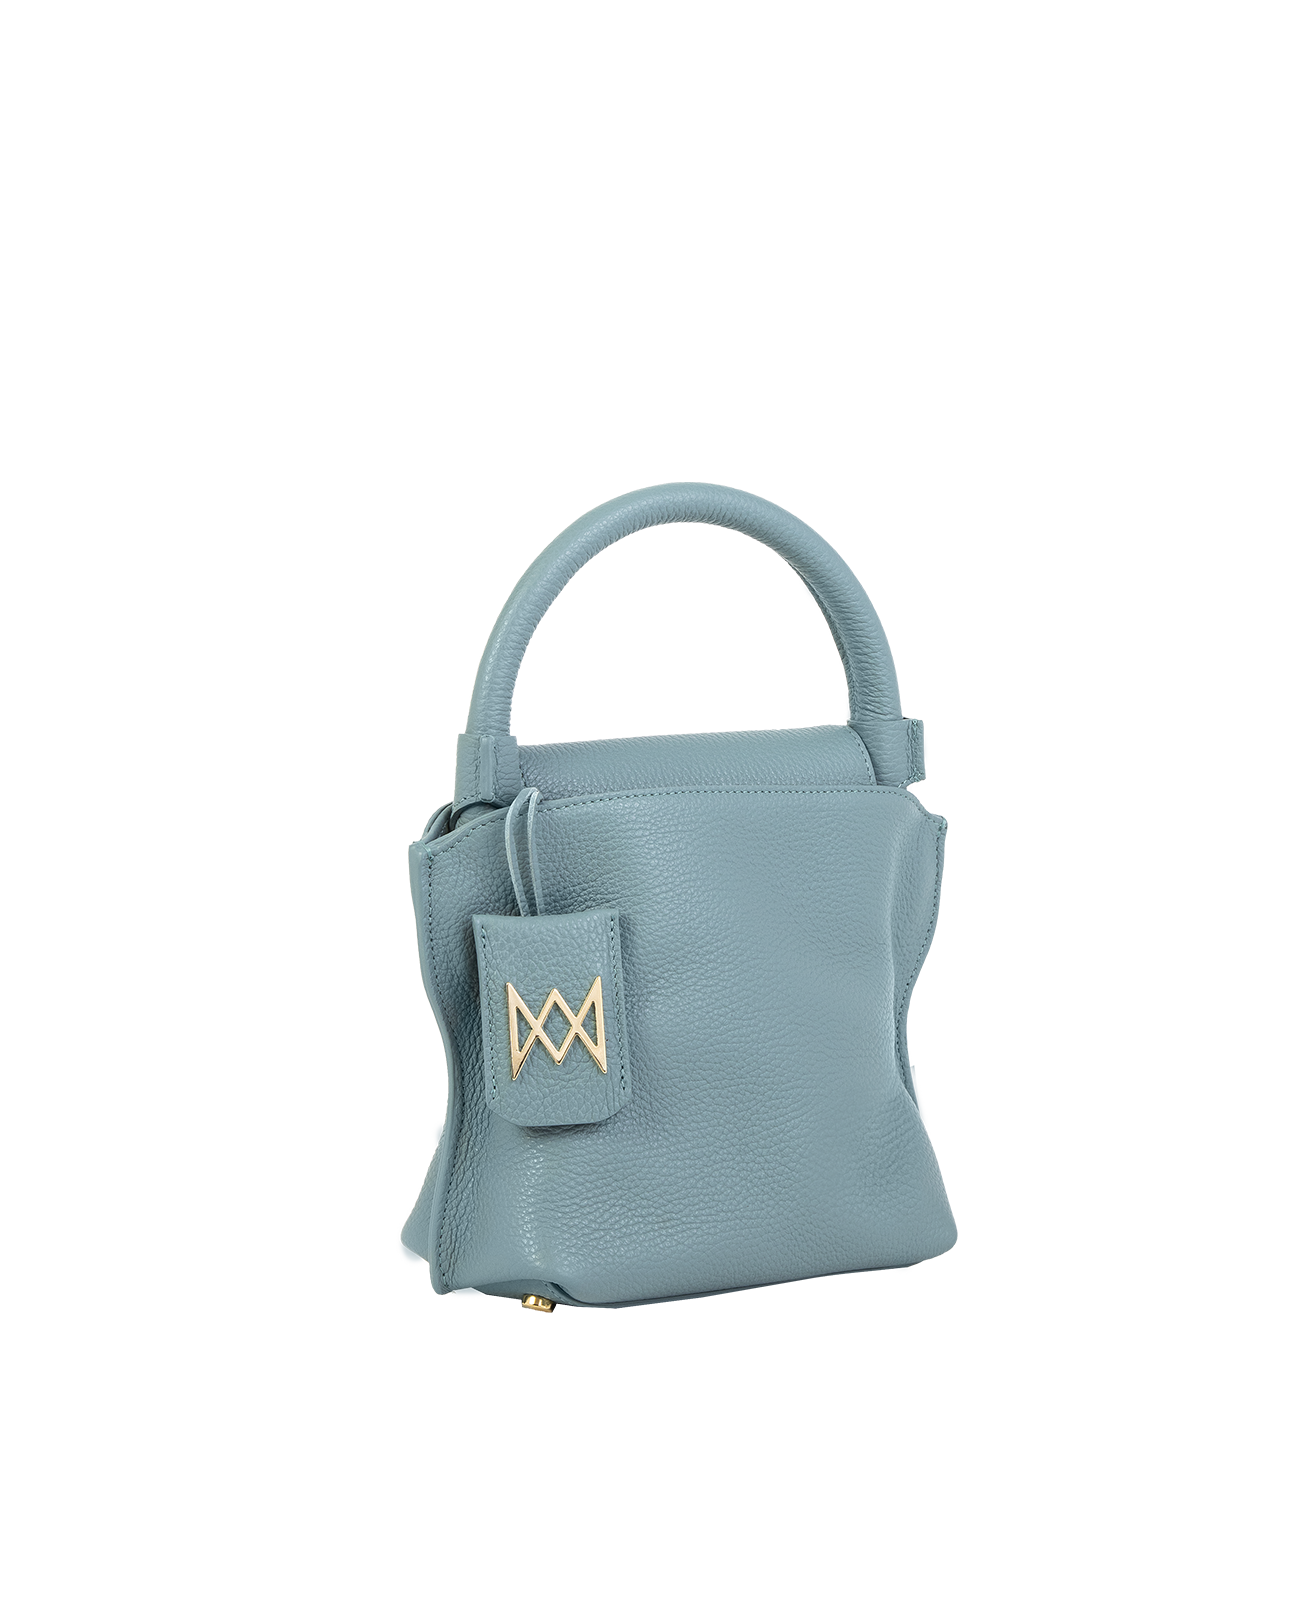 Cross-body bag in Italian full-grain leather, semi-aniline calf Italian leather with detachable shoulder strap.Three compartments, zip pocket in the back compartment. Magnetic flap closure with logo. Color: Light Blue. Size:Medium